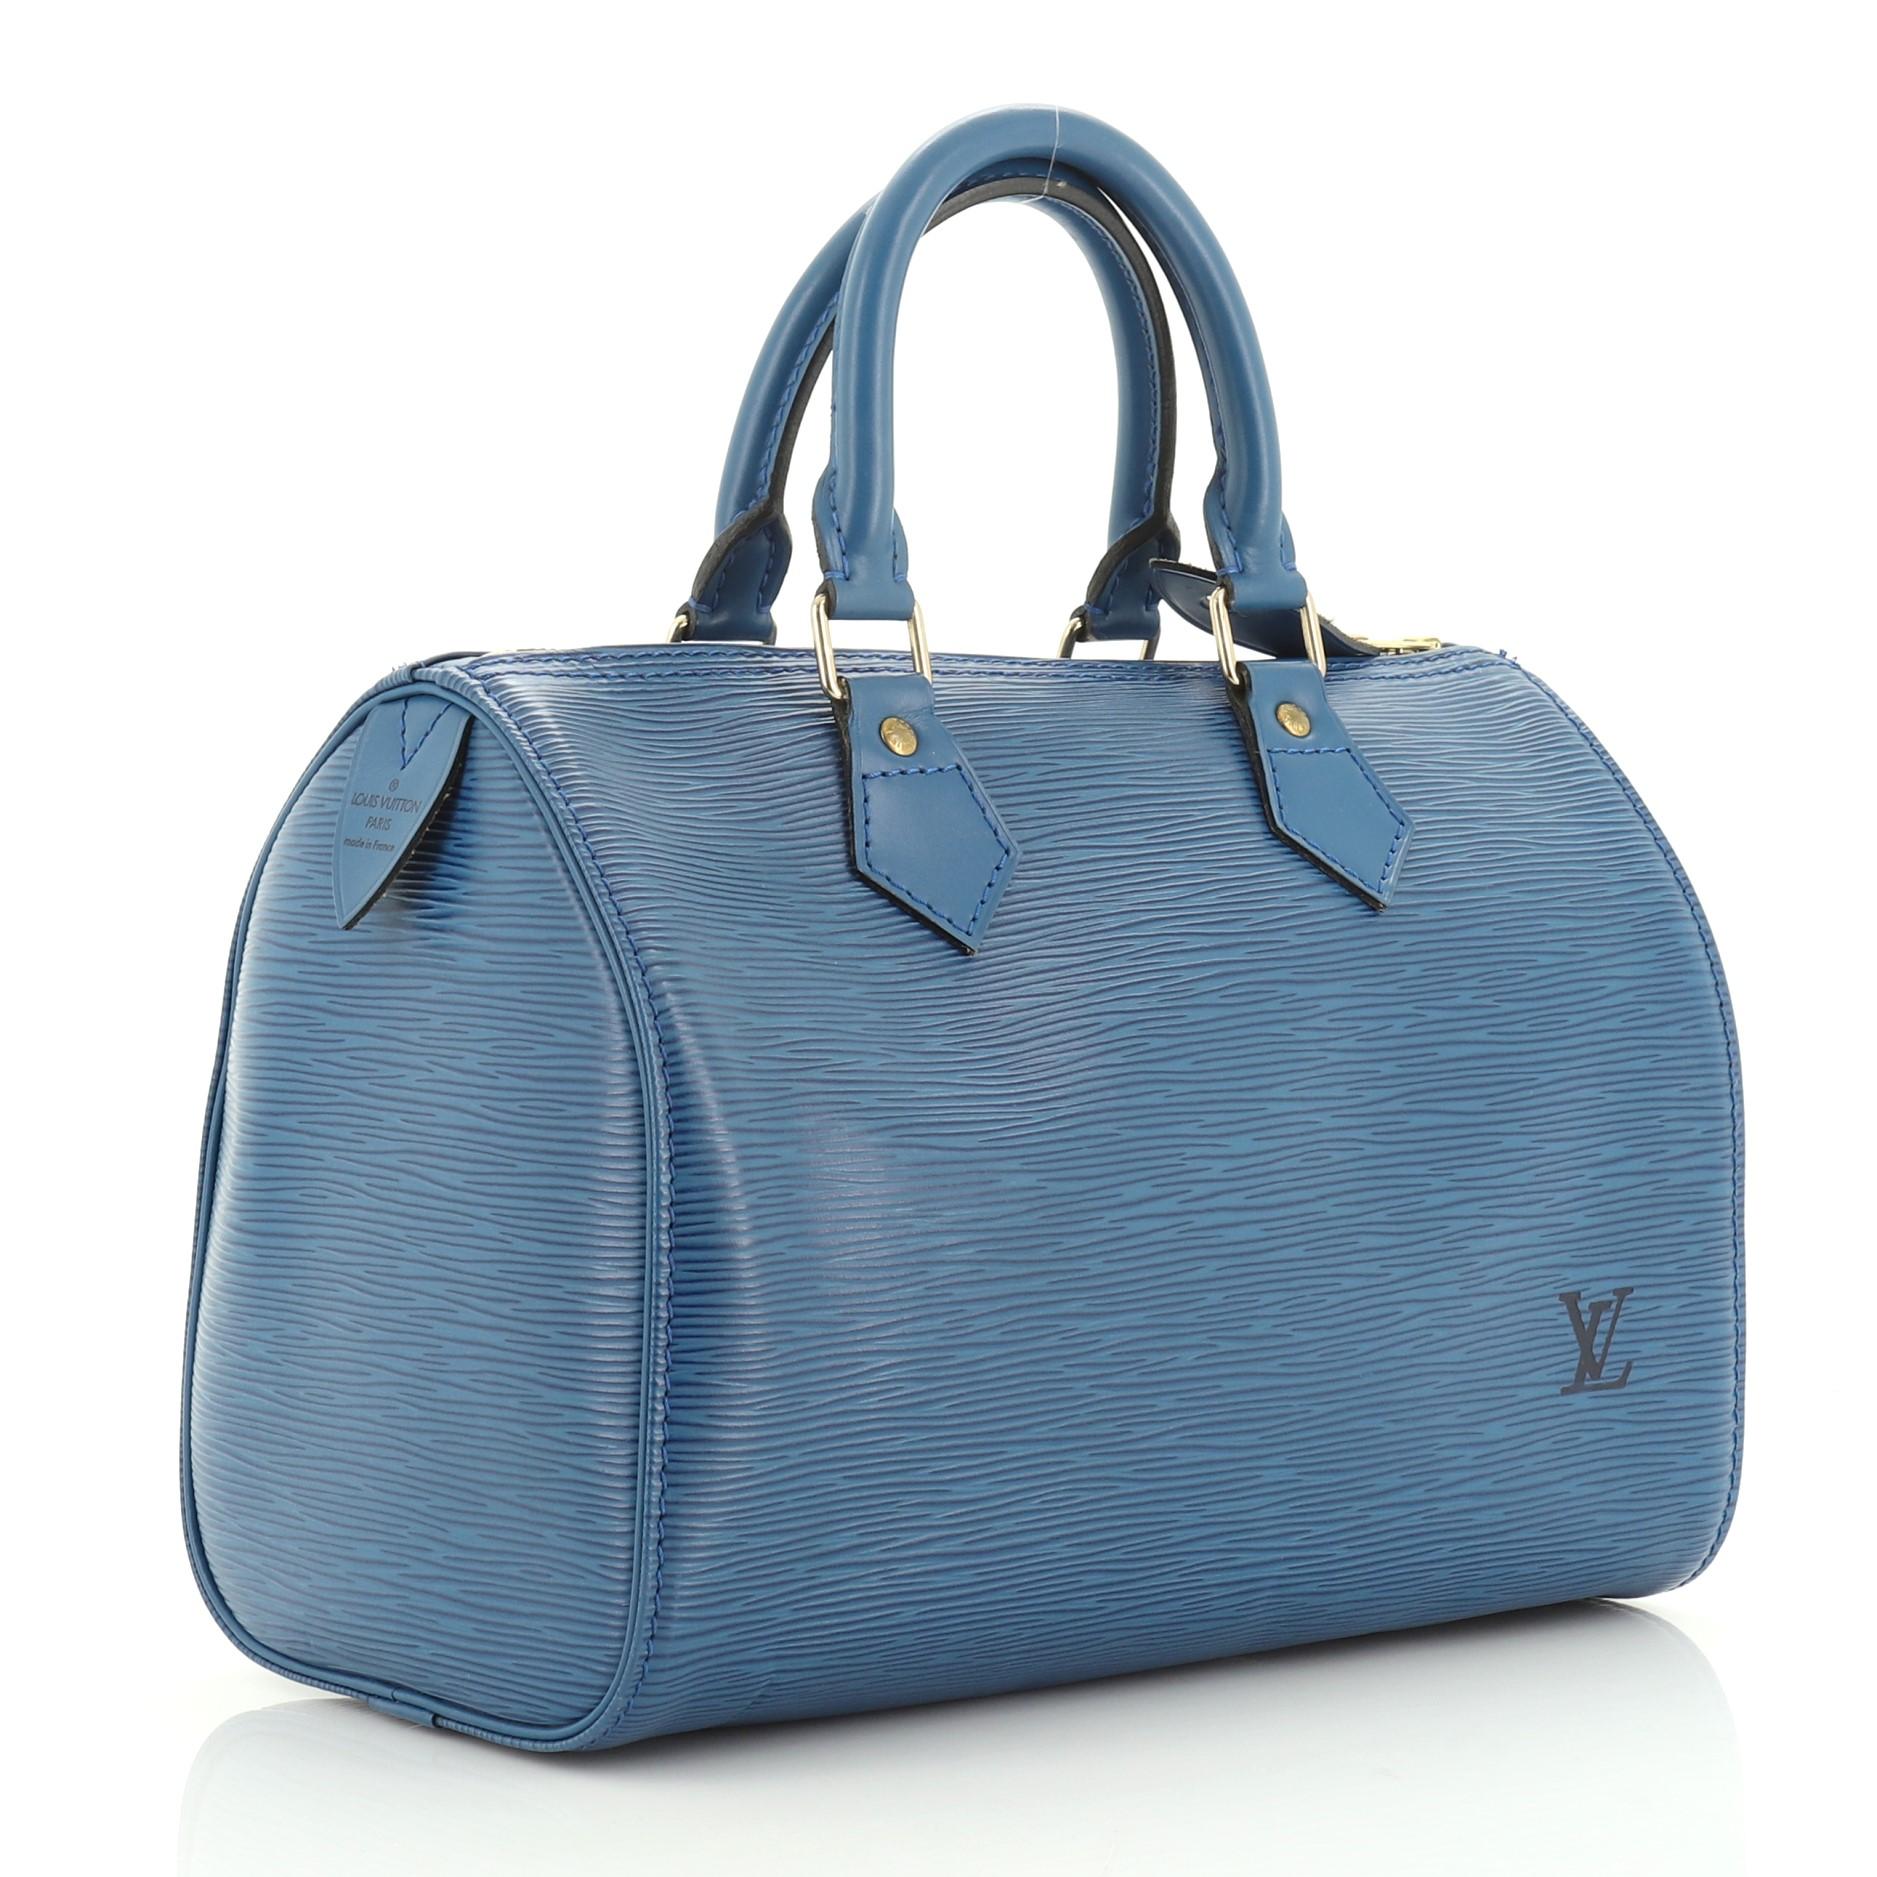 This Louis Vuitton Speedy Handbag Epi Leather 25, crafted from blue epi leather, features dual rolled leather handles, exterior side pocket, and gold-tone hardware. Its zip closure opens to a blue raw leather interior. Authenticity code reads: